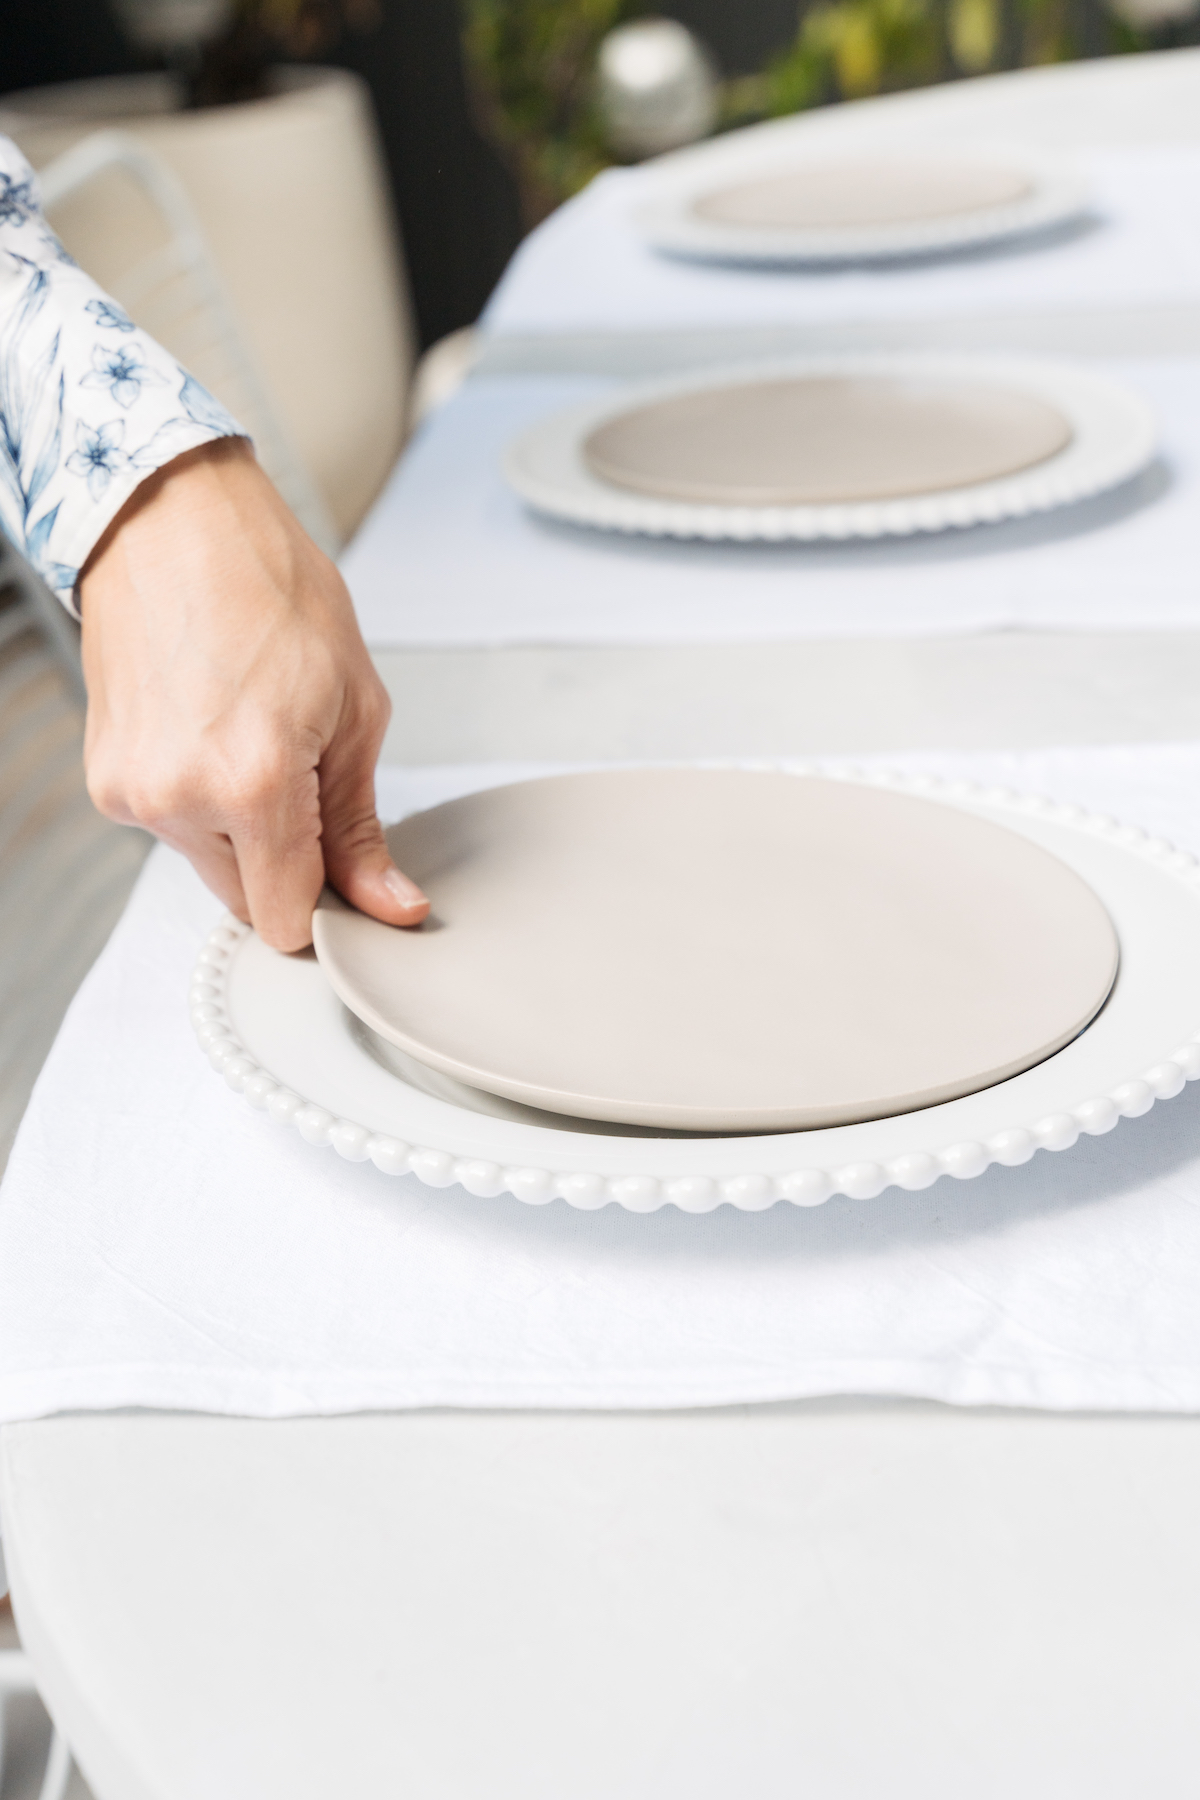 Layer a side plate on top of a dinner plate